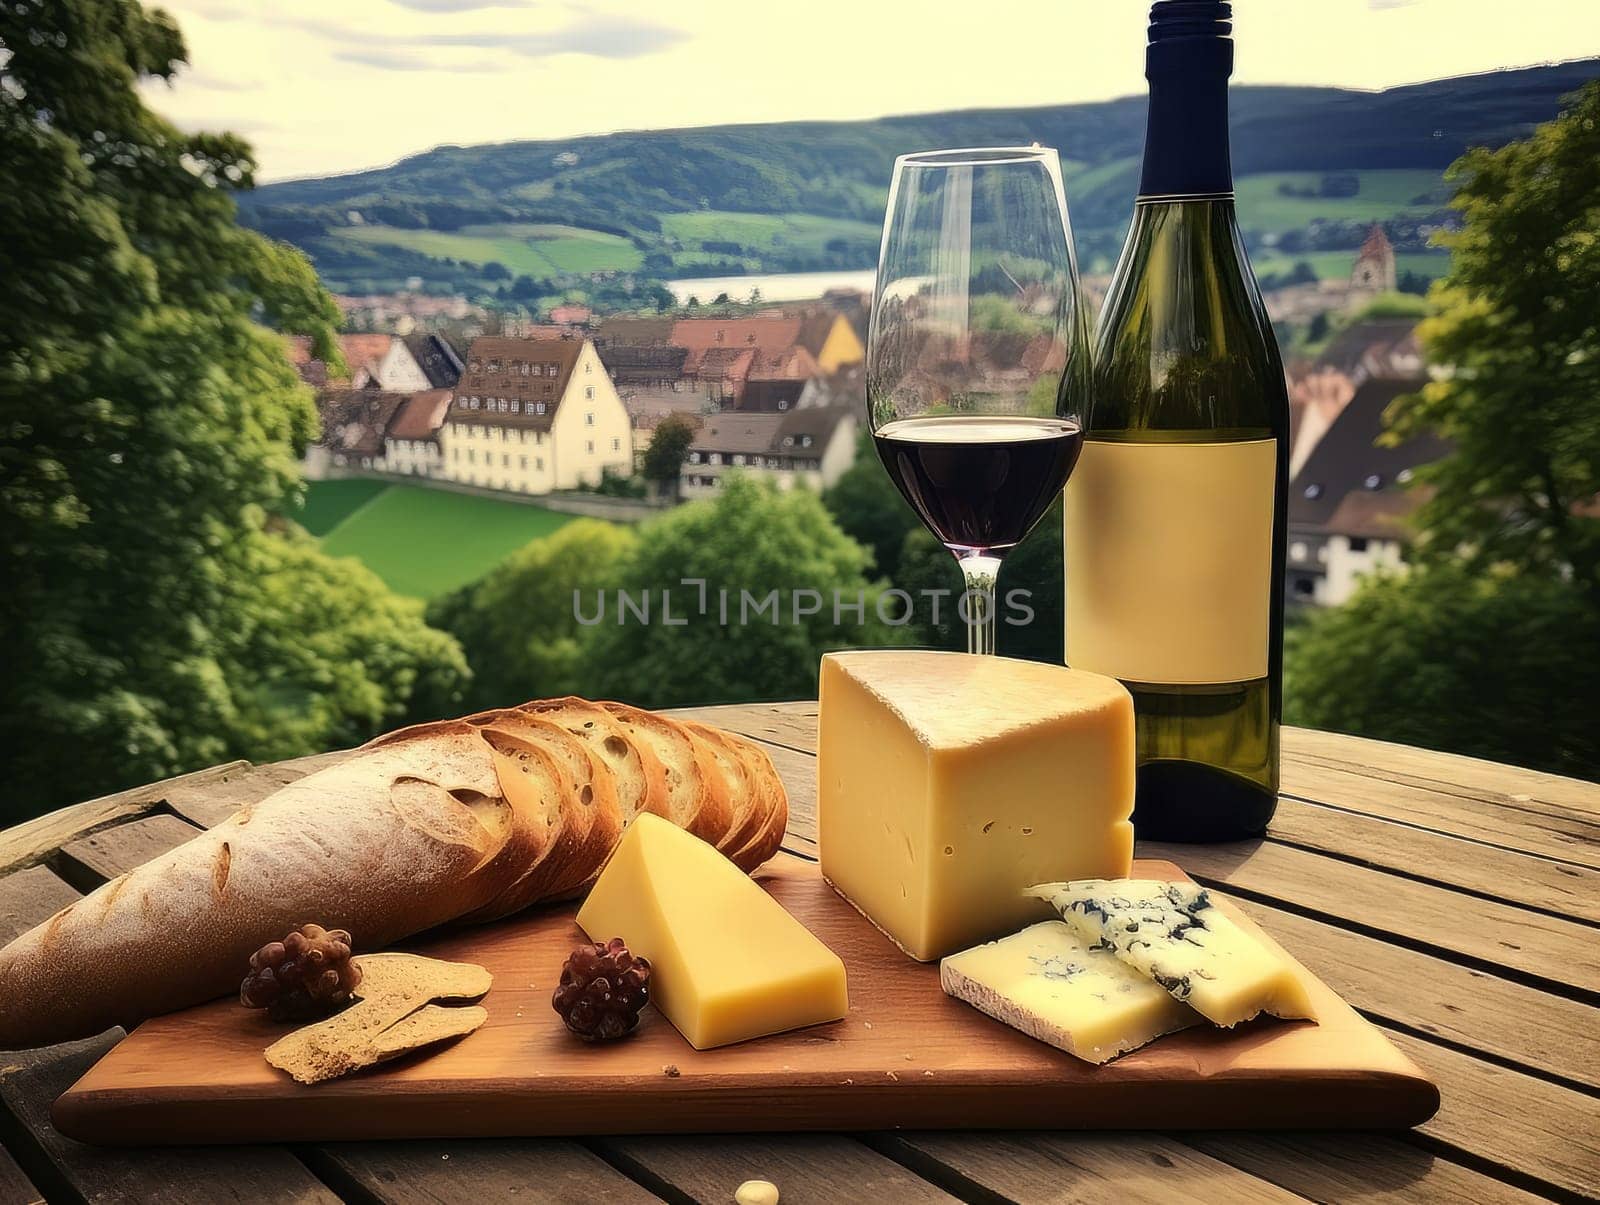 Cheese board with different varieties and white wine against the backdrop of village. AI by but_photo